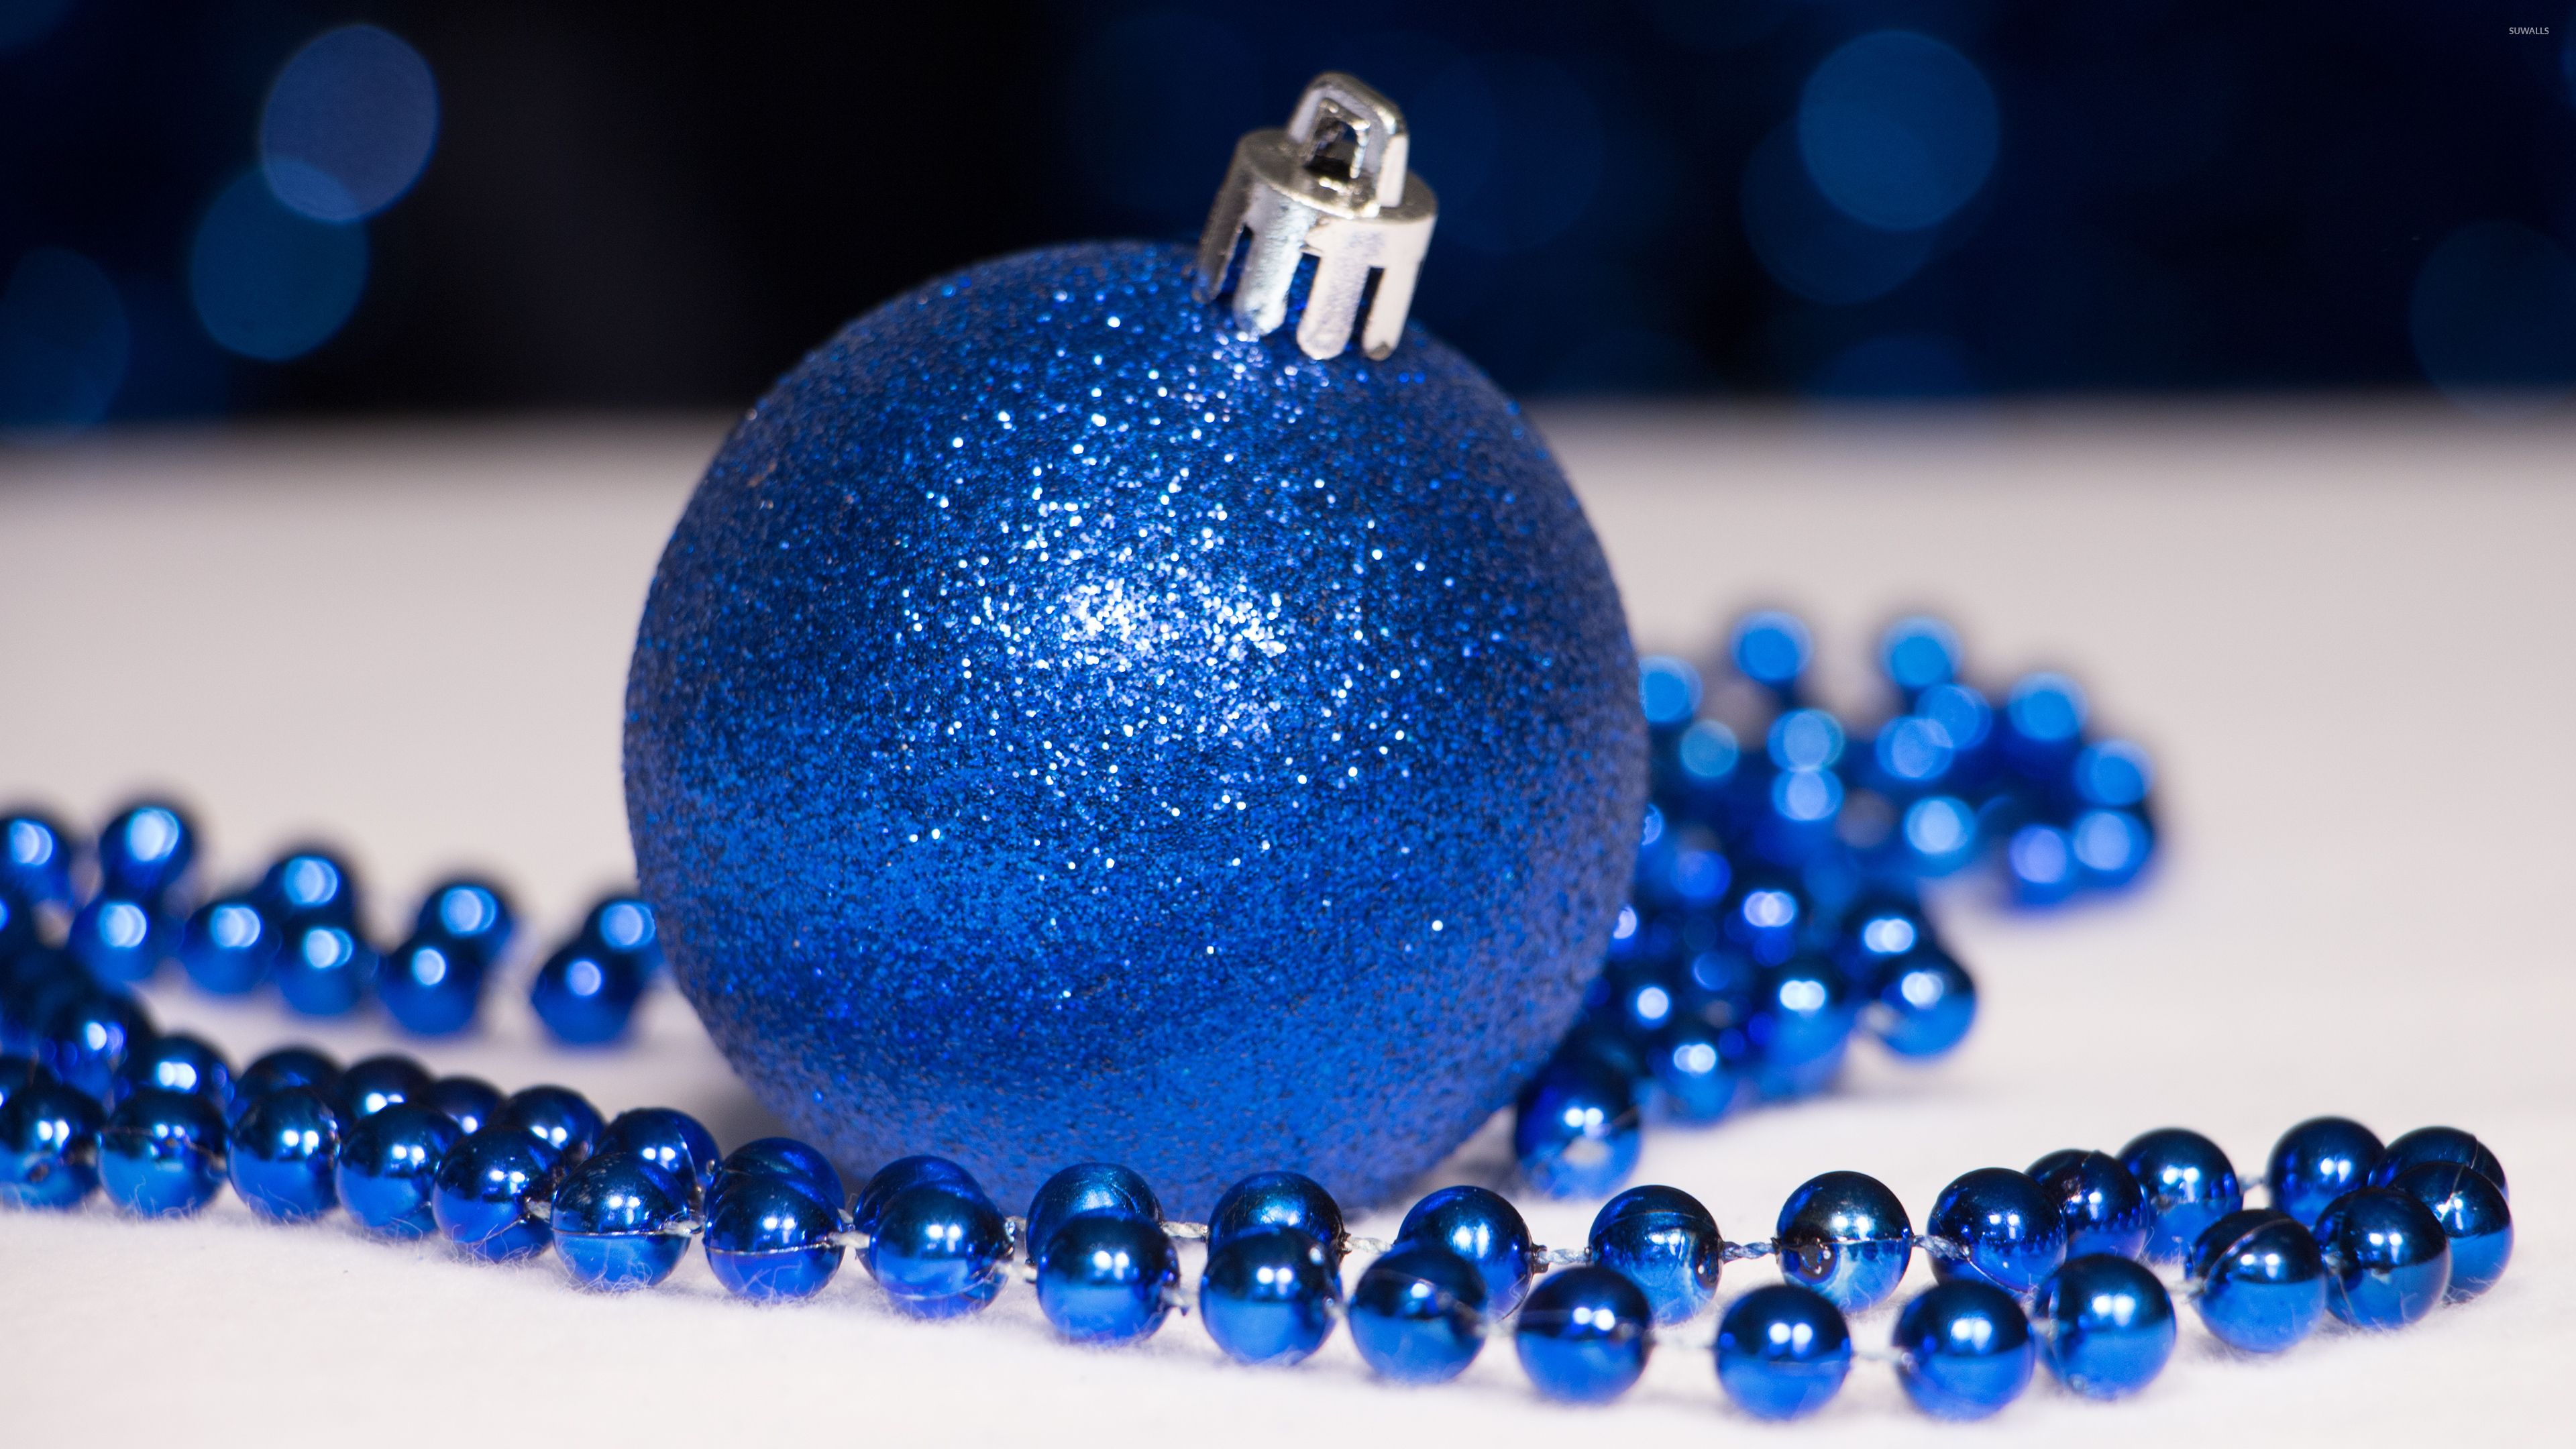 Free download Blue Christmas ornaments wallpaper Holiday wallpaper 51140 [3840x2160] for your Desktop, Mobile & Tablet. Explore Blue Ornaments Wallpaper. Blue Ornaments Wallpaper, Christmas Ornaments Wallpaper, Christmas Ornaments Wallpaper